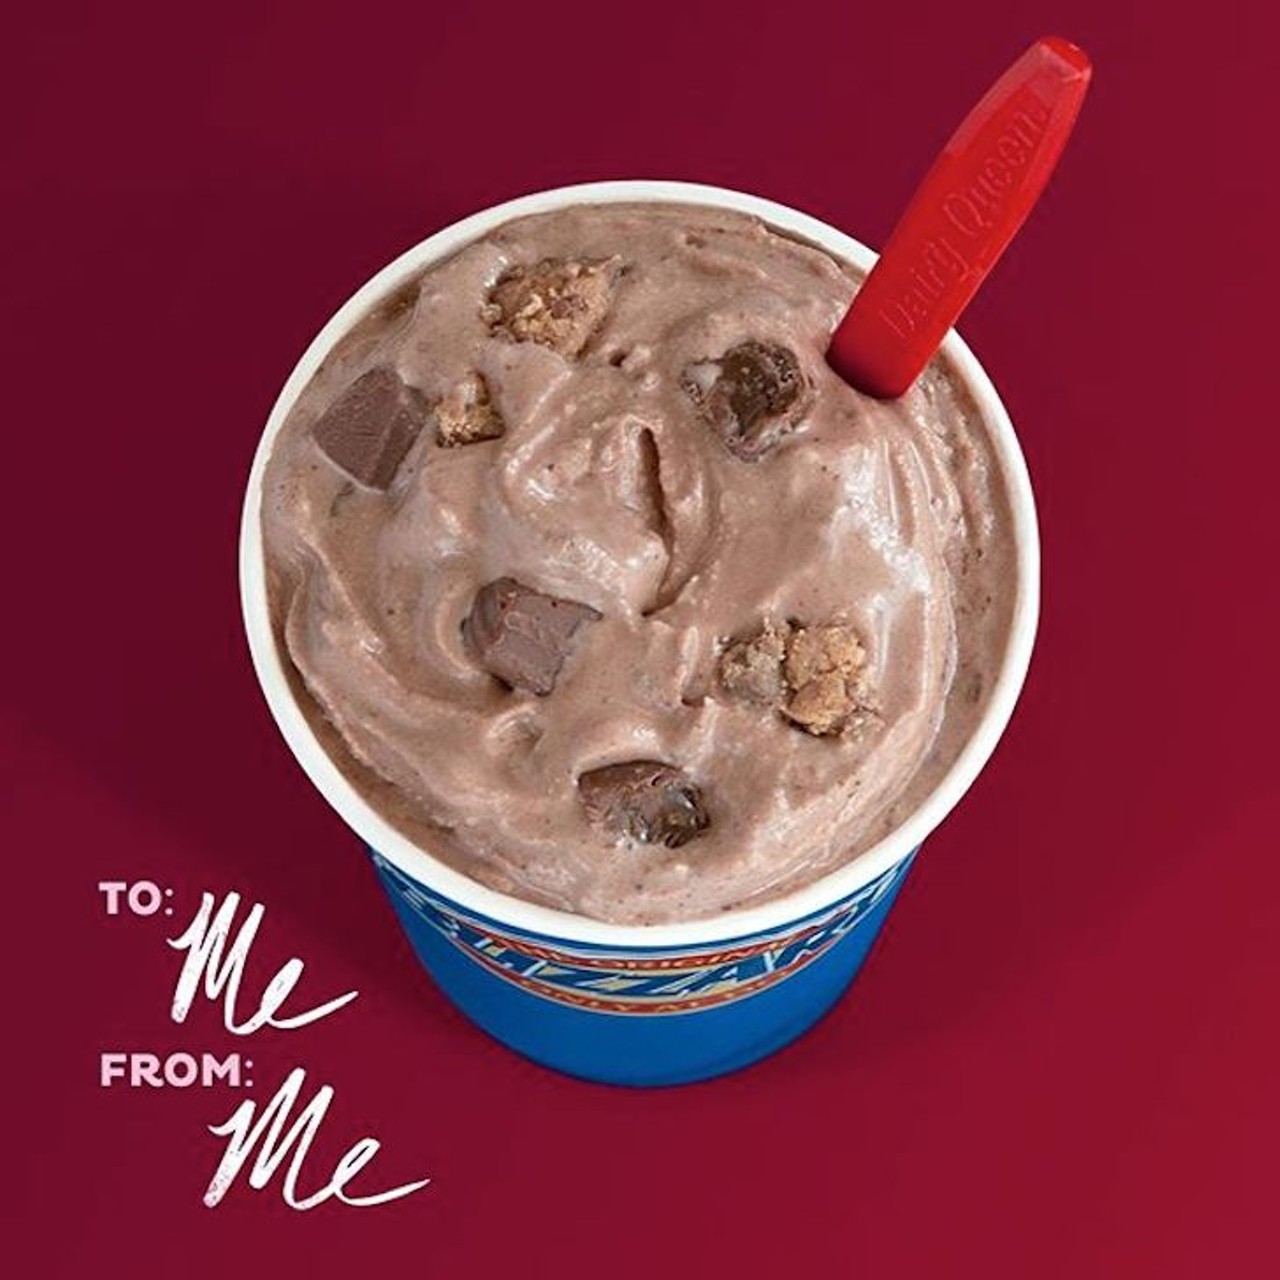 Go to Dairy Queen and get the singles&#146; blizzard topped with salted caramel truffles, because you too are salty. 
Photo via Instagram (dairyqueen)